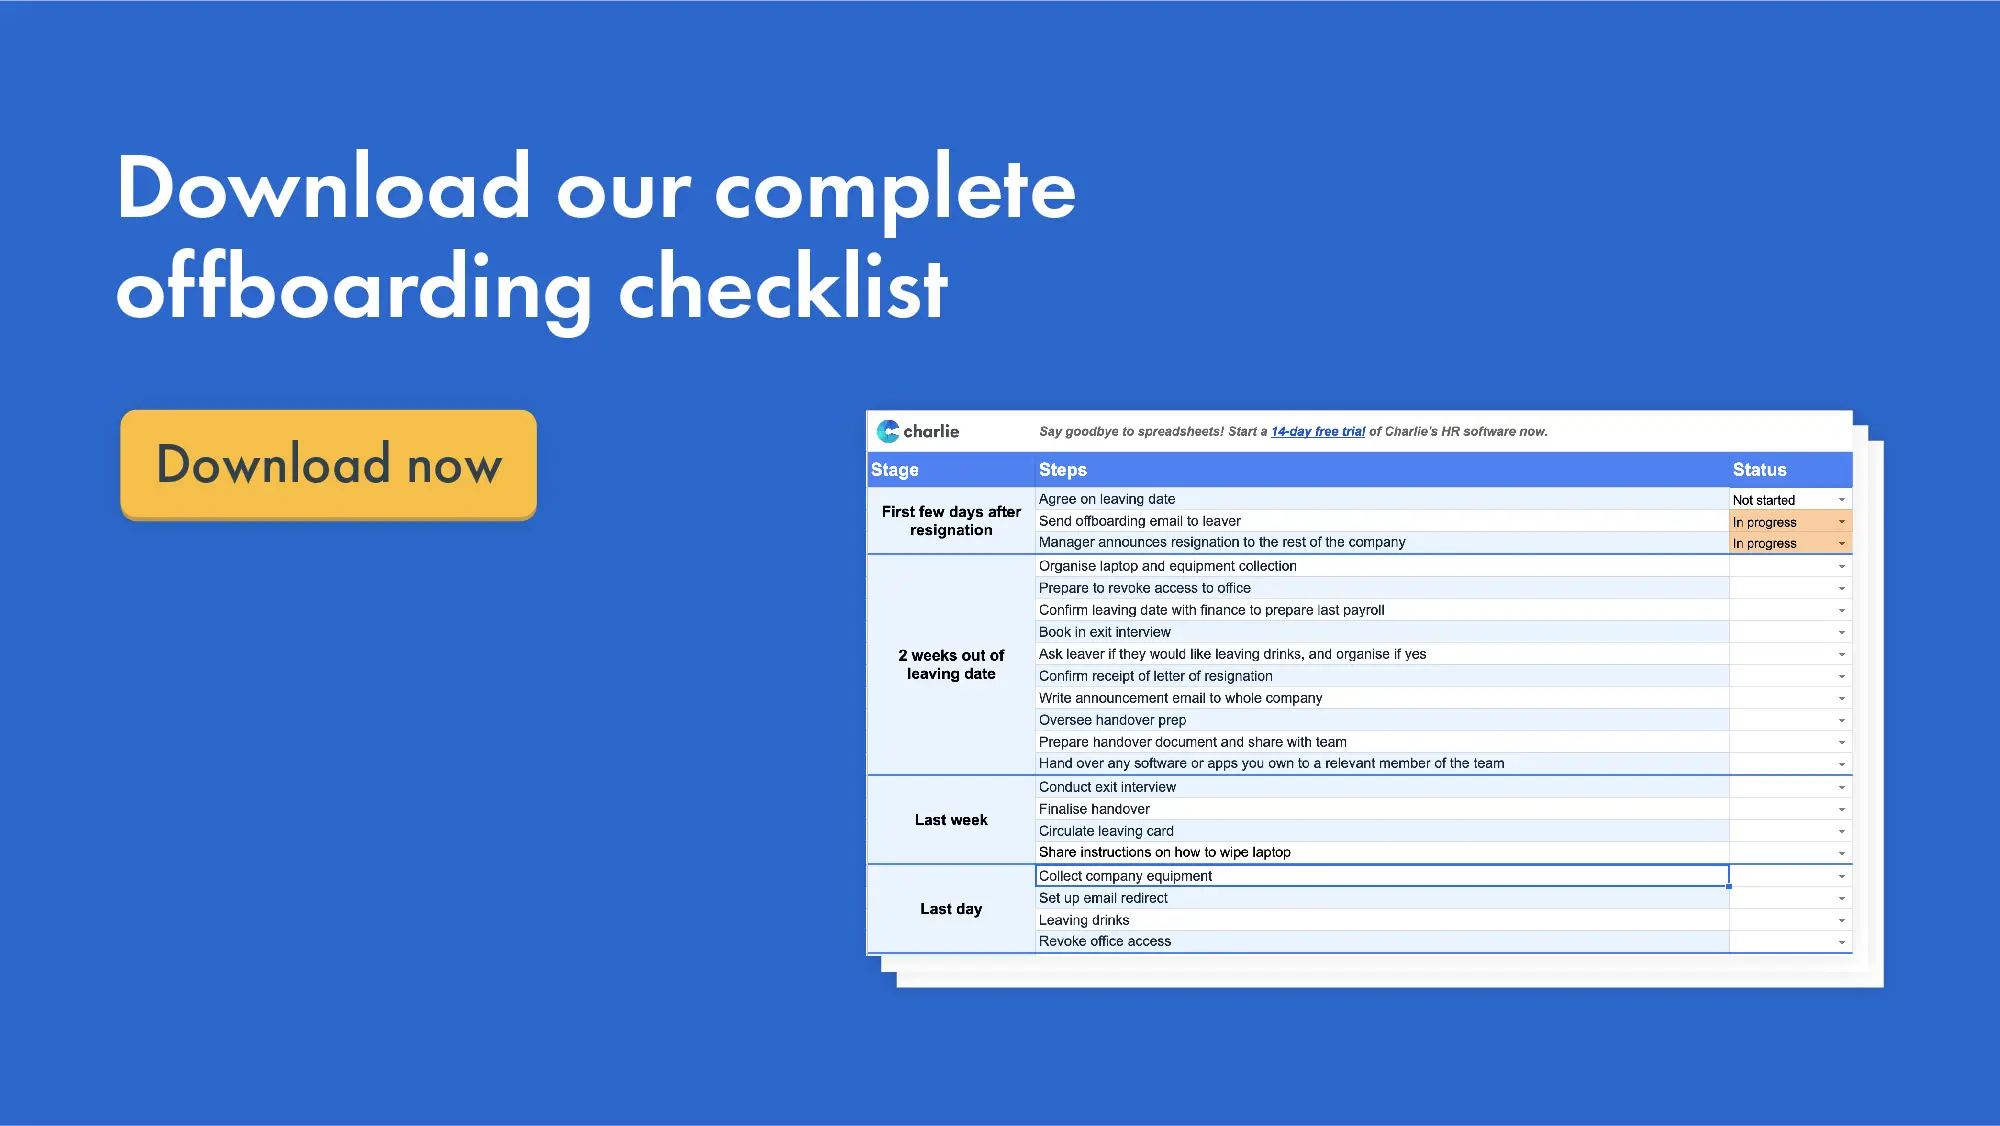 Click here to download our offbparding checklist